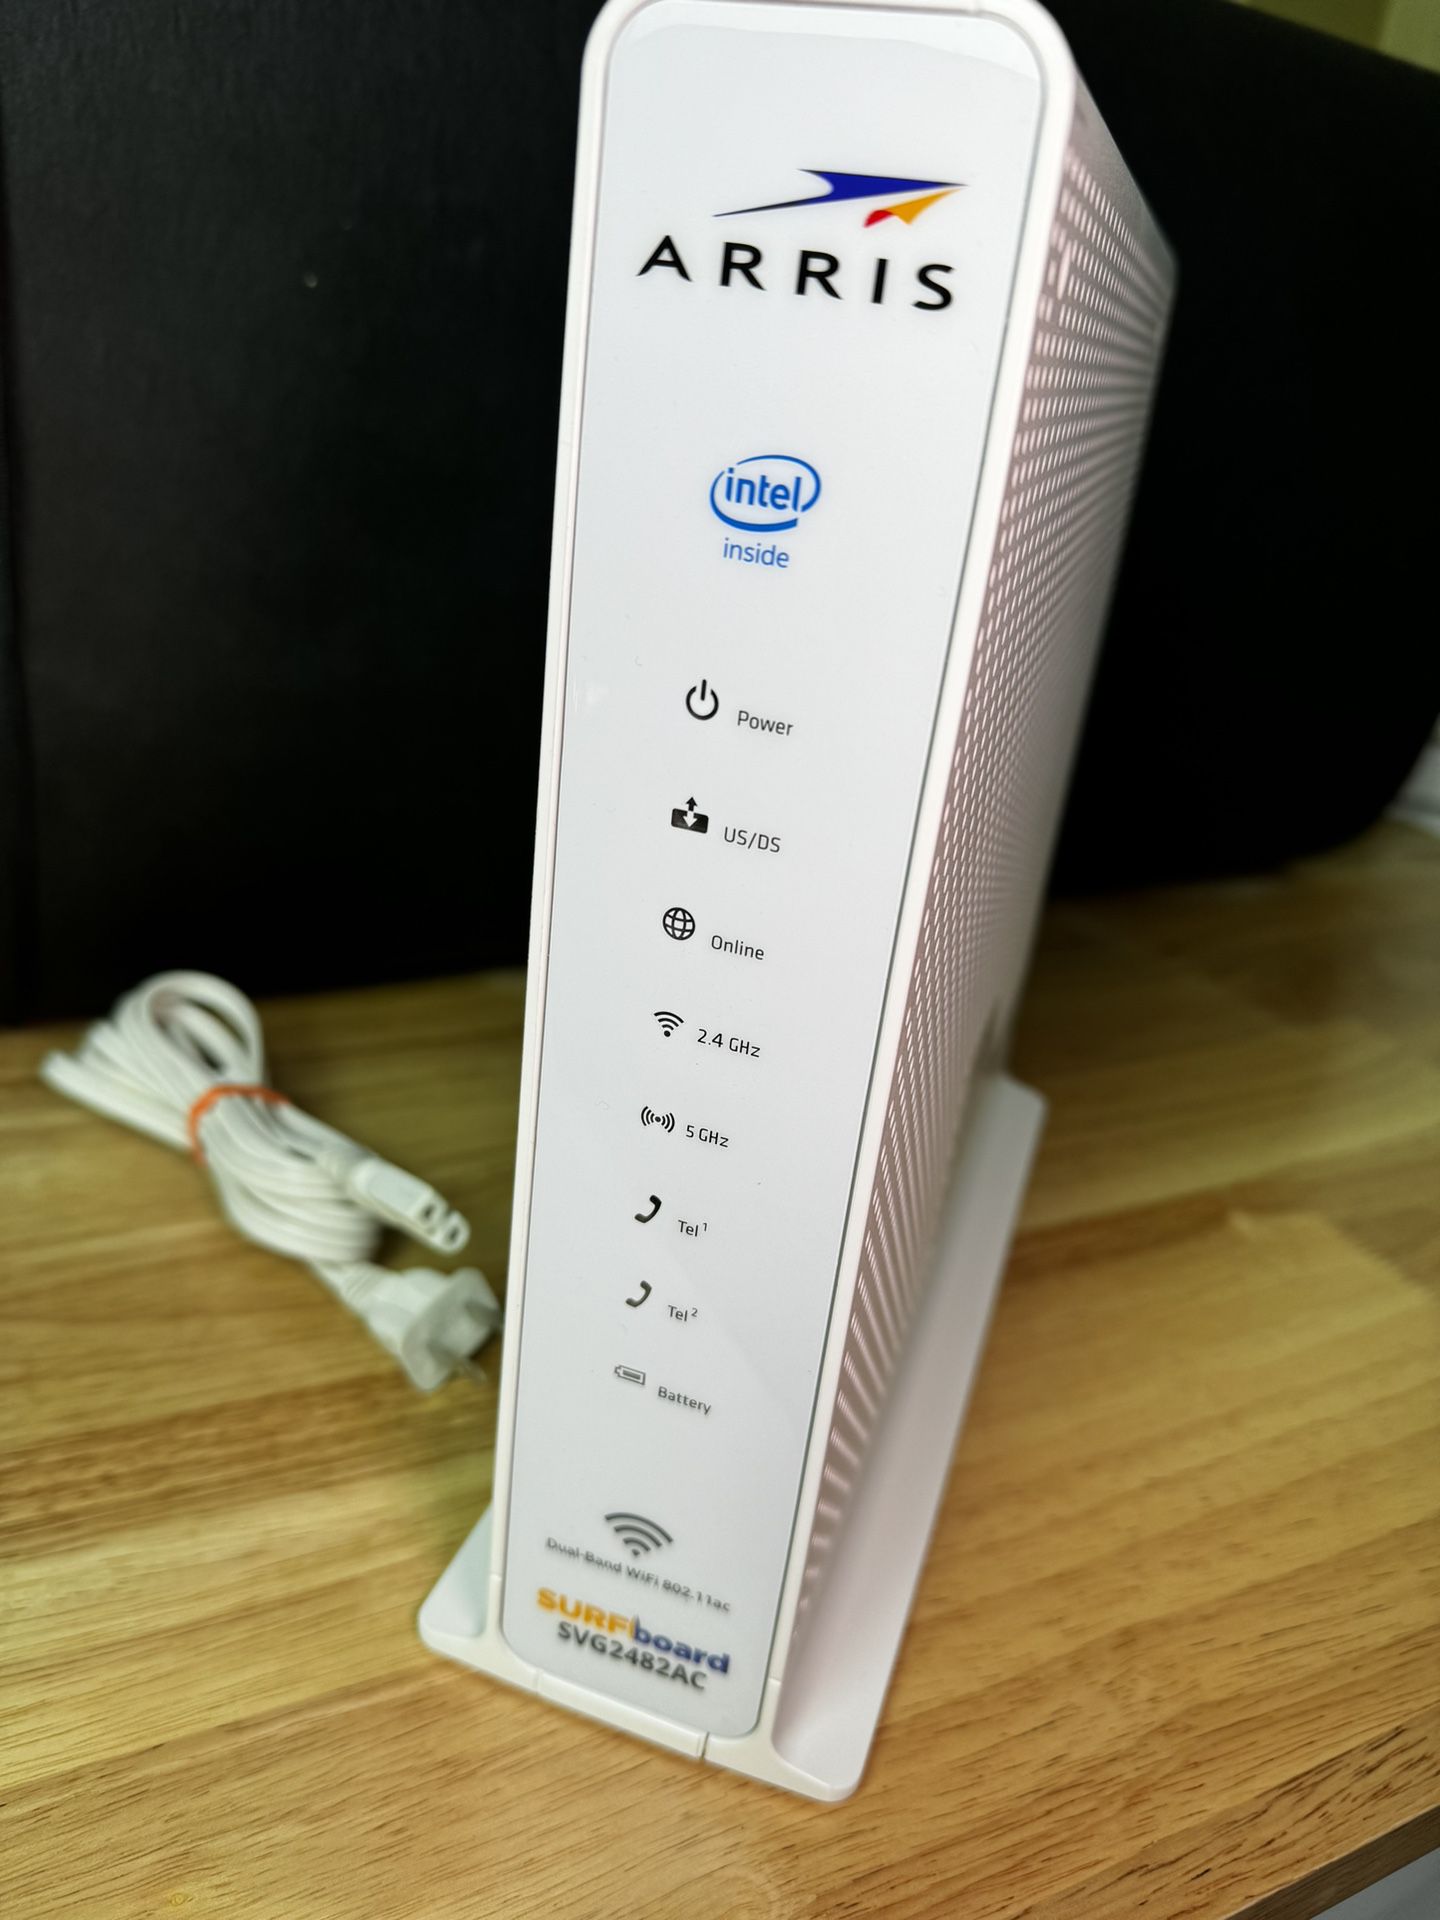 ARRIS SURFboard SVG2482AC DOCSIS 3.0 Cable Modem & AC2350 Wi-Fi Router , Comcast Xfinity Internet & Voice , Four 1 Gbps Ports , 2 Telephony Ports for 